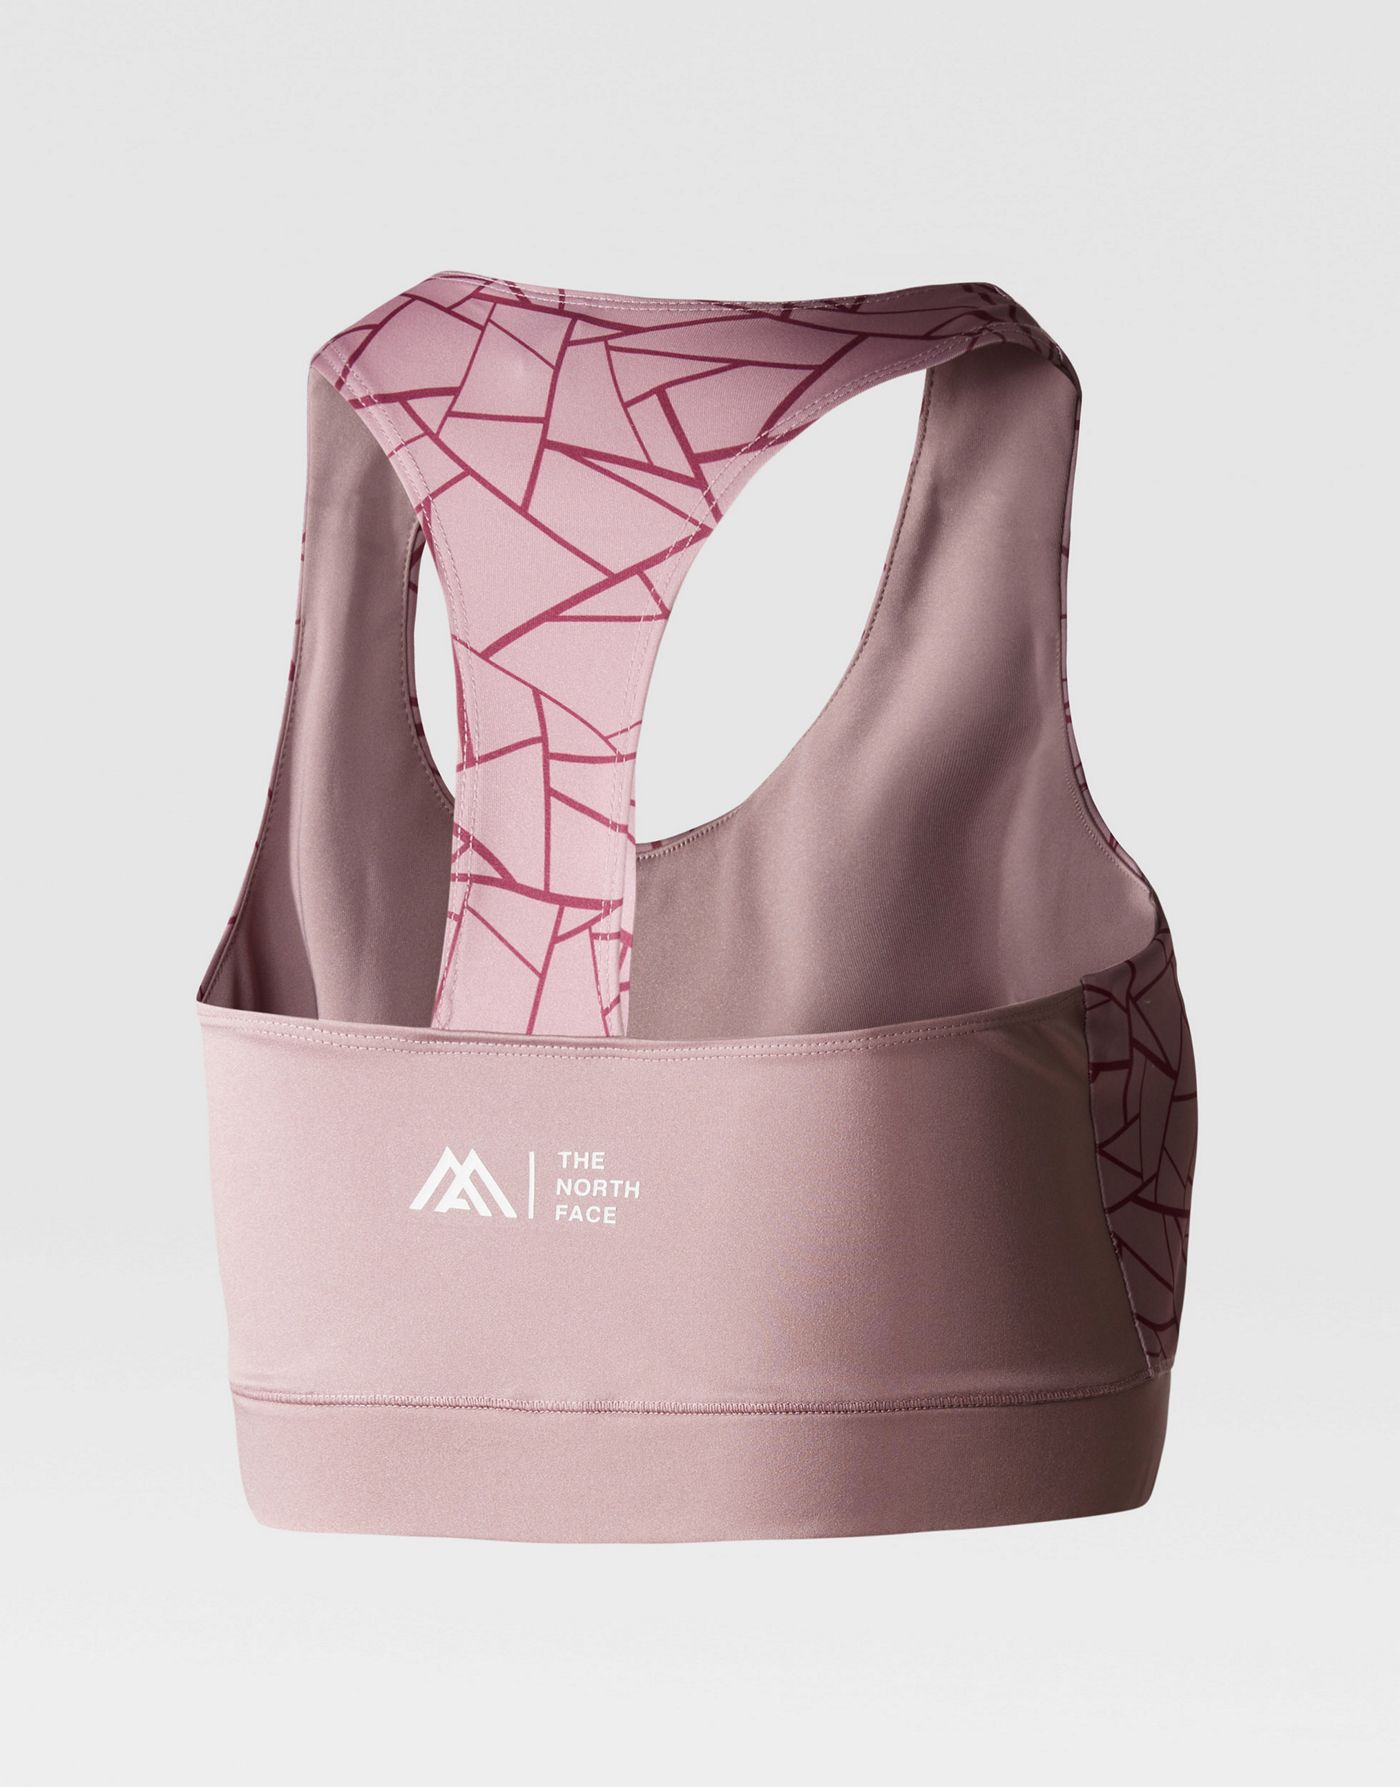 The North Face Mountain athletics lab tanklette in fawn grey tnf tangram